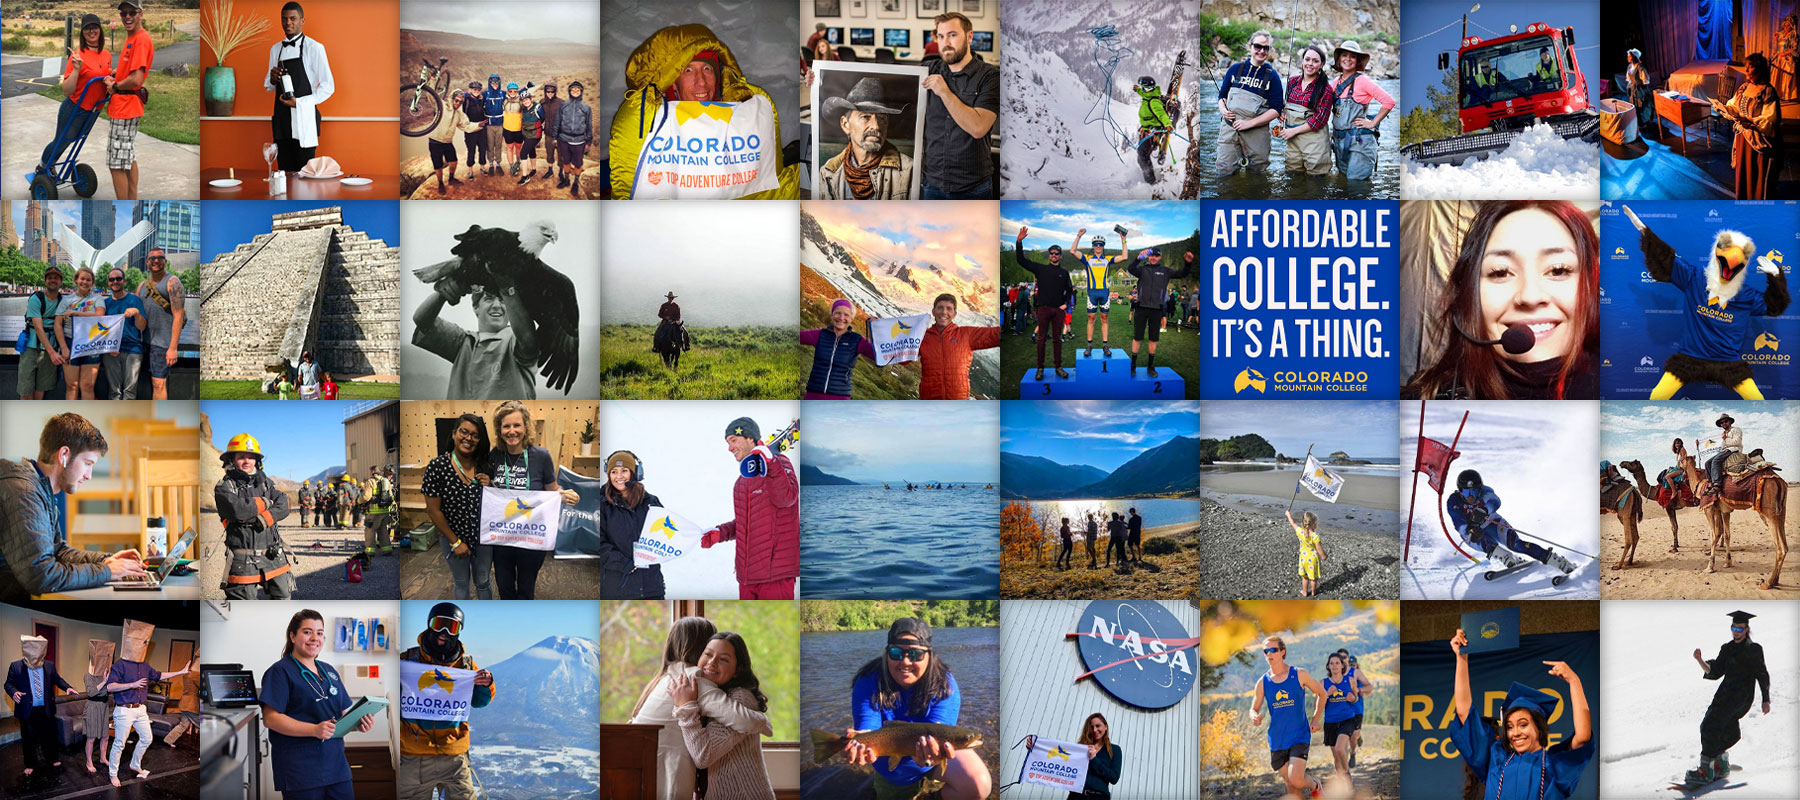 Mosaic of photos from Colorado Mountain College Instagram